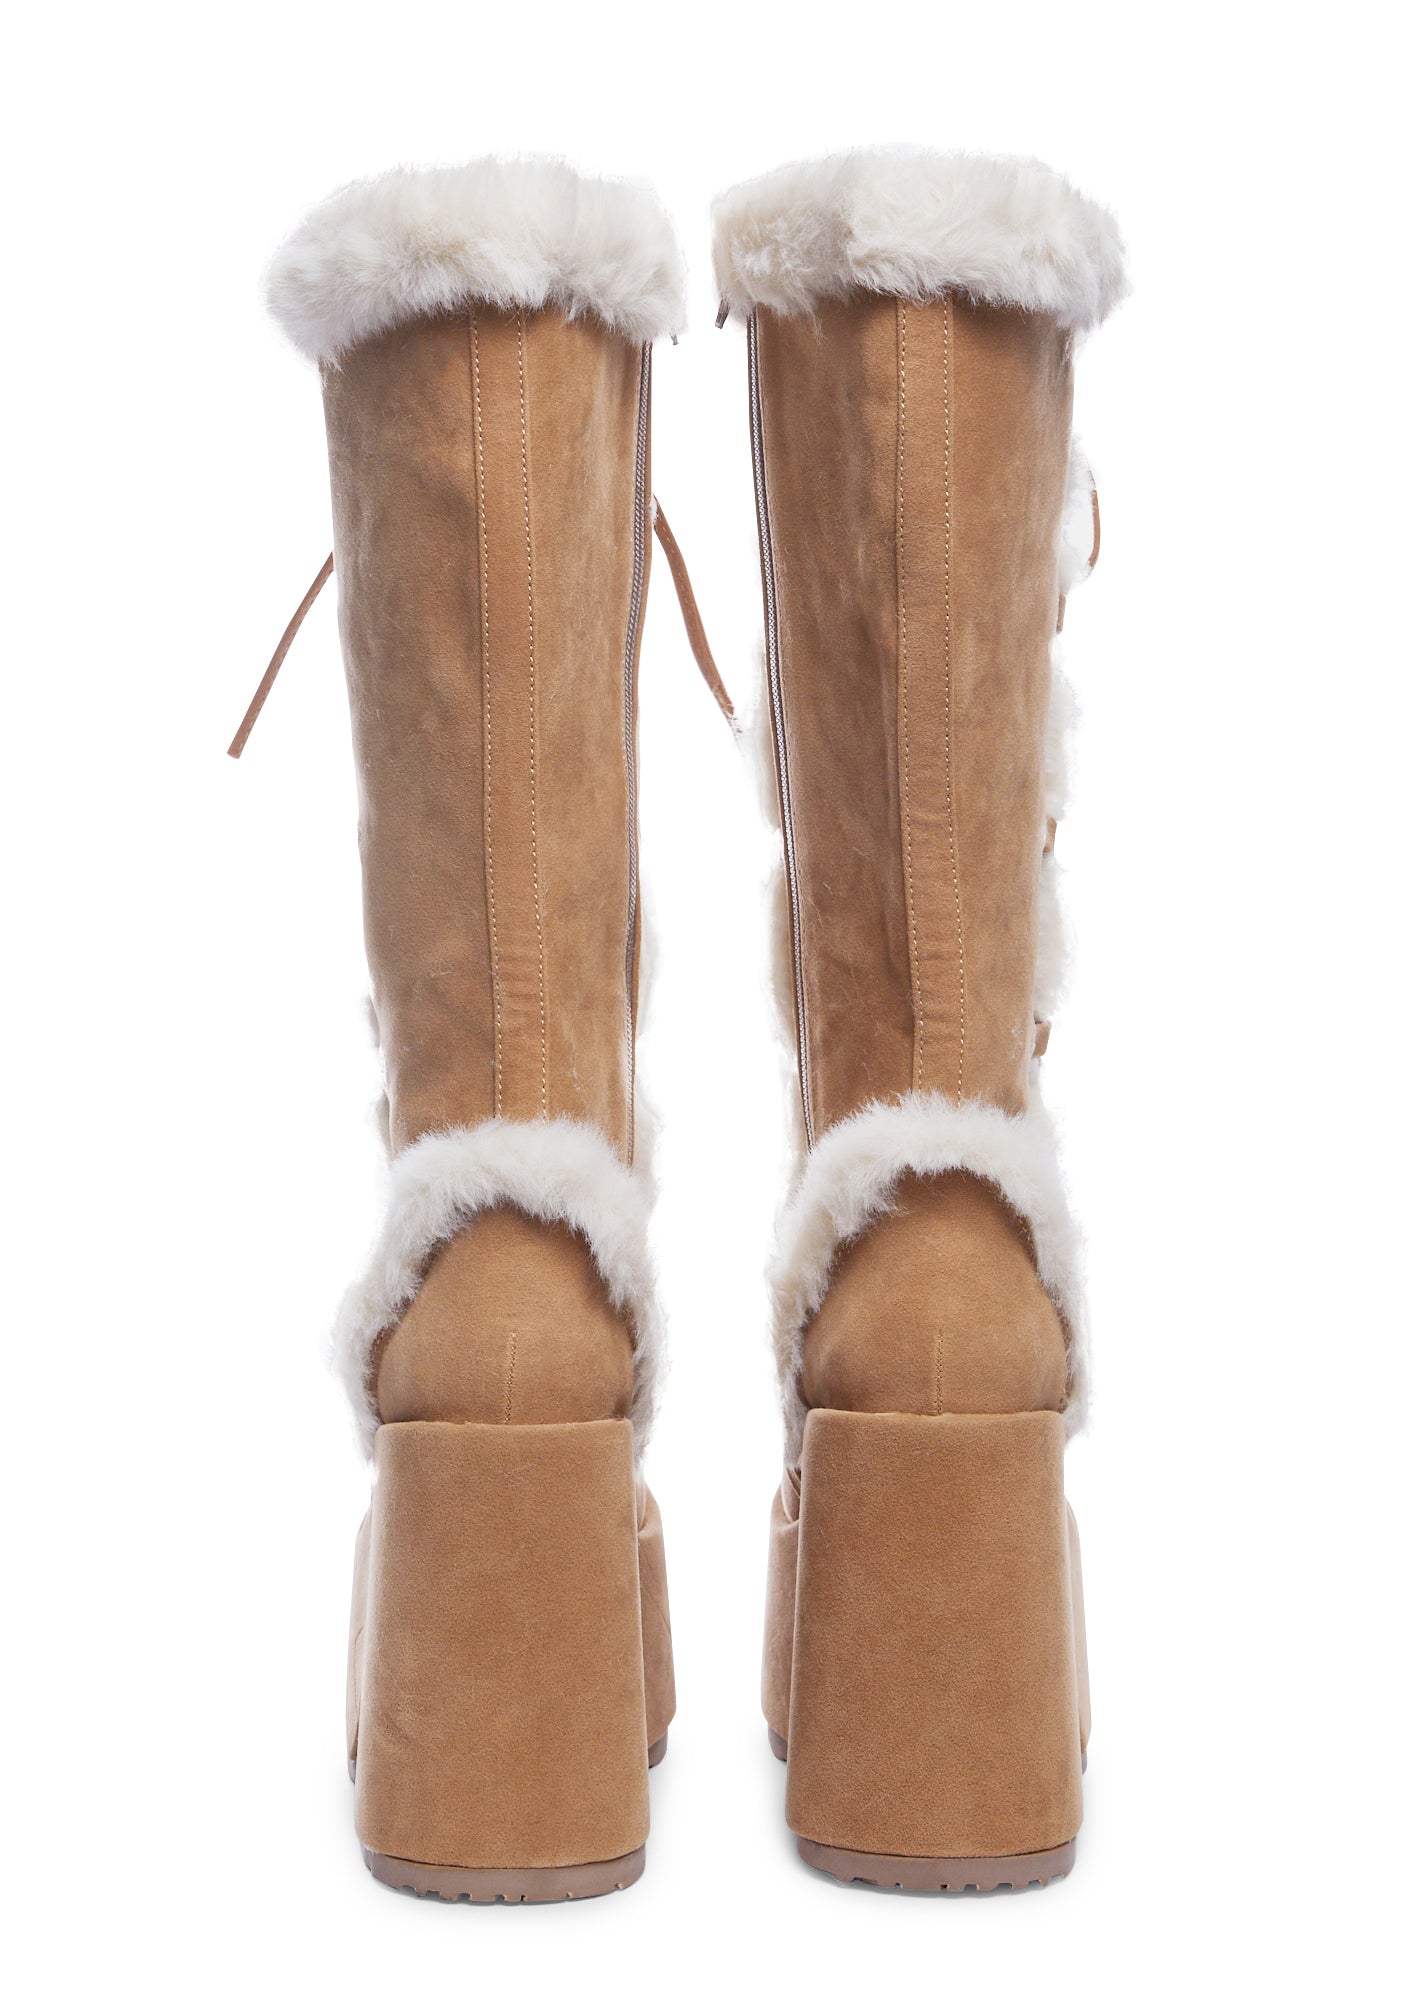 K17. Camel brown boots with white fur trim for 18 dolls. - Silly Monkey